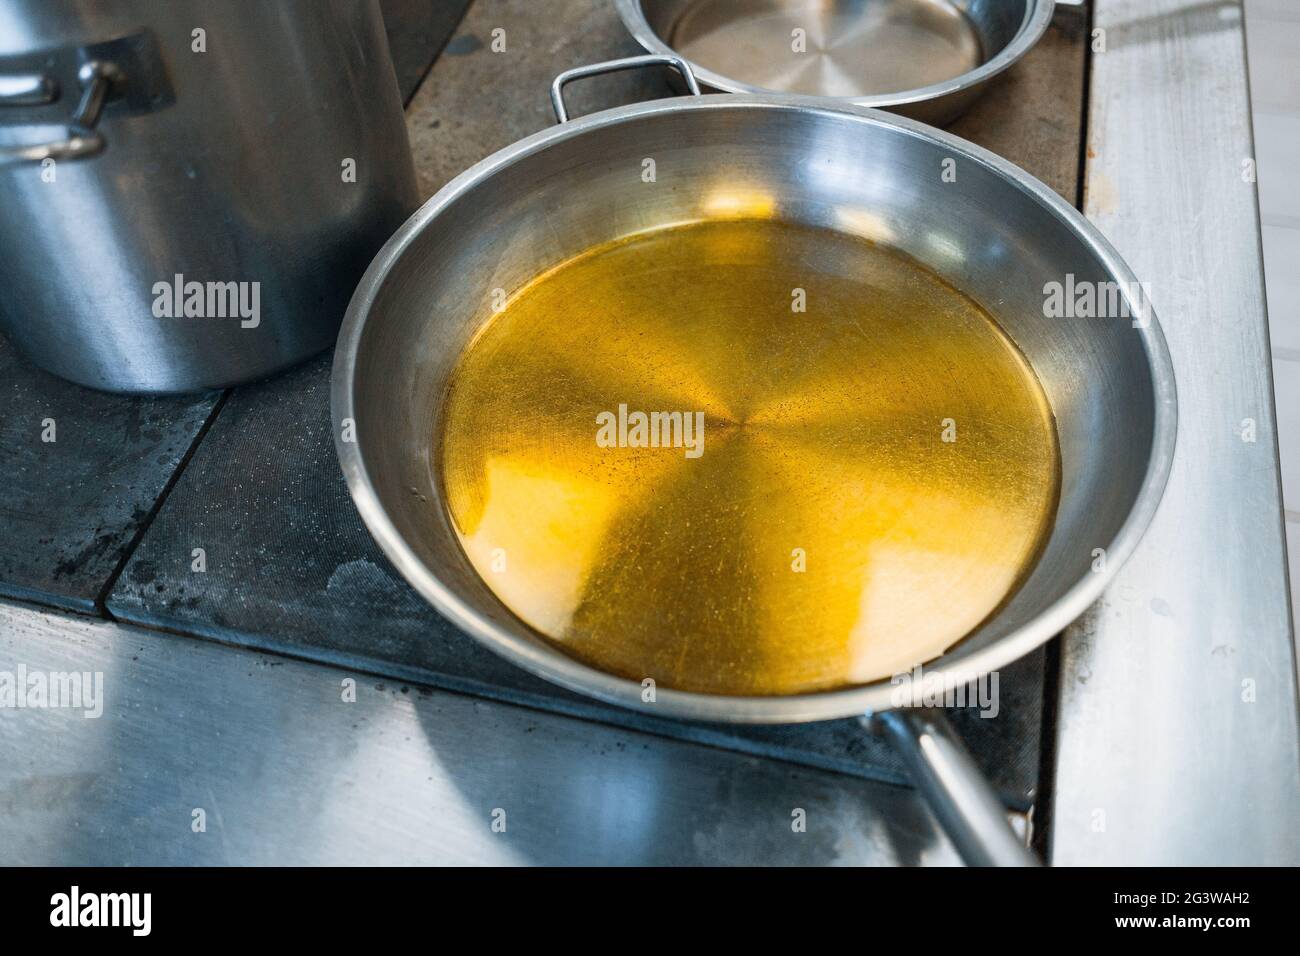 https://c8.alamy.com/comp/2G3WAH2/gray-stylish-aluminum-cookware-on-the-stove-in-the-dining-room-a-round-frying-pan-is-filled-with-vegetable-oil-or-fat-2G3WAH2.jpg